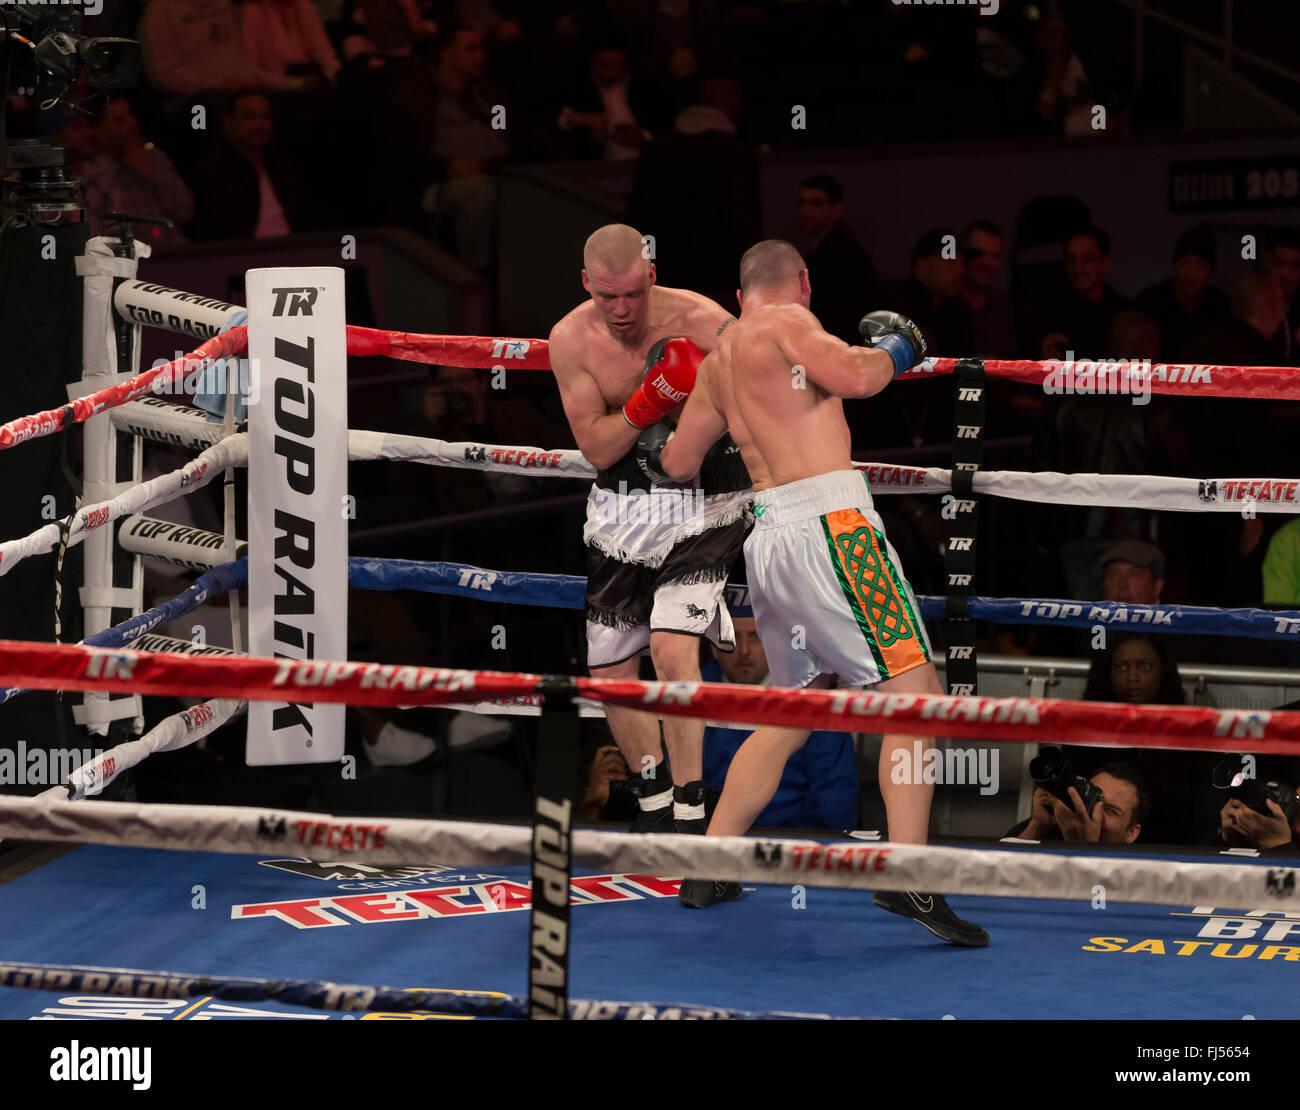 May 28, 2016; Clay Burns (blue trunks) and Isaac Avalos (black trunks) box  during their lightweight boxing match at Gila River Arena in Glendale, AZ.  Burns won via second round TKO. Joe